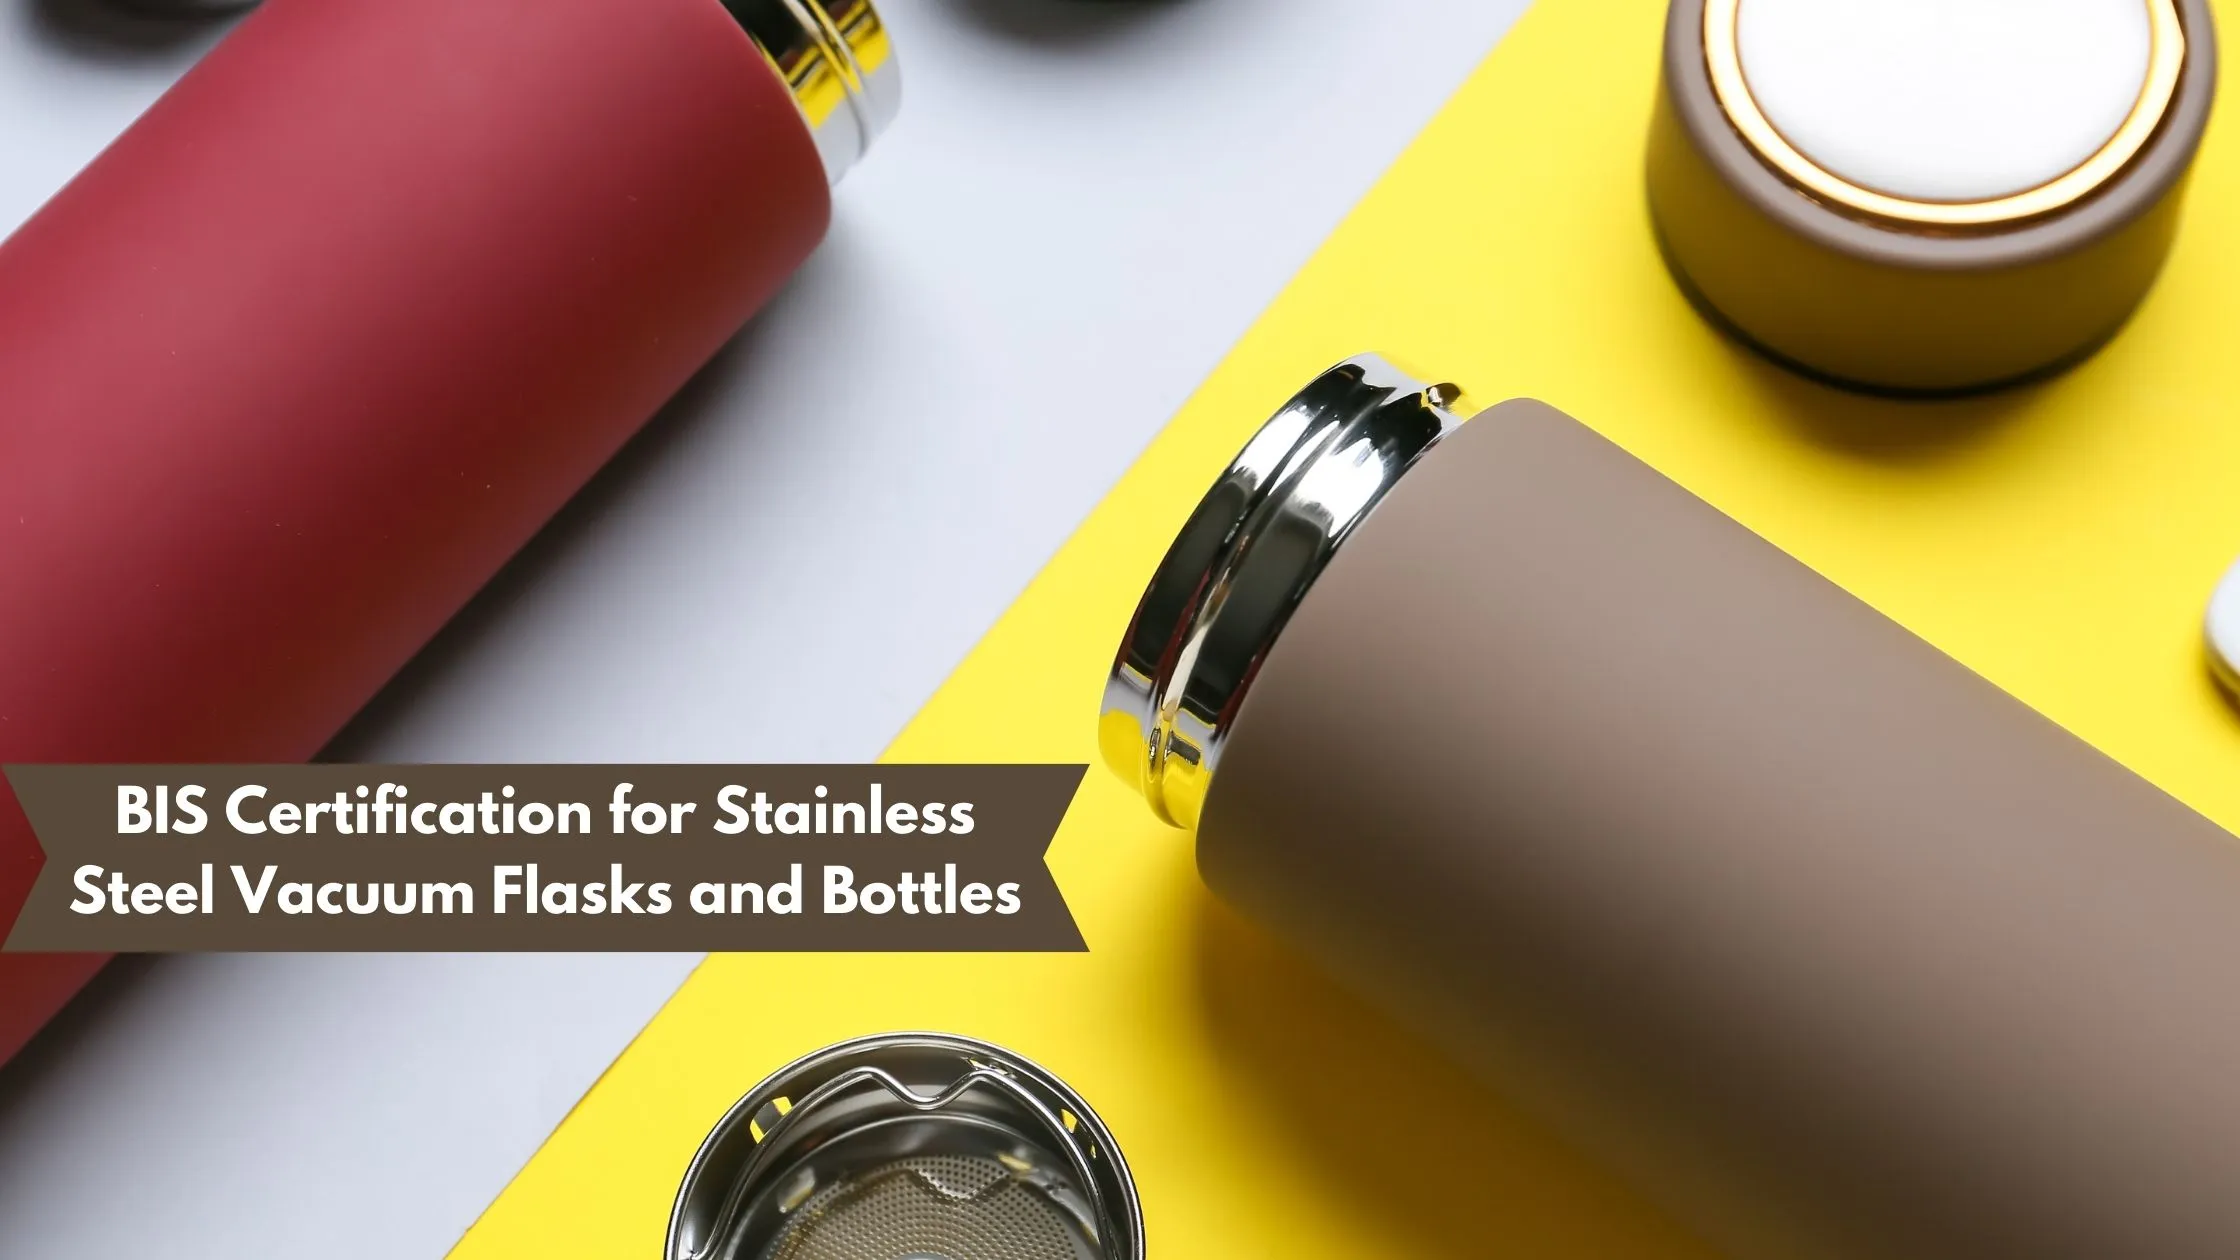 BIS Certification for Stainless Steel Vacuum Flasks and Bottles